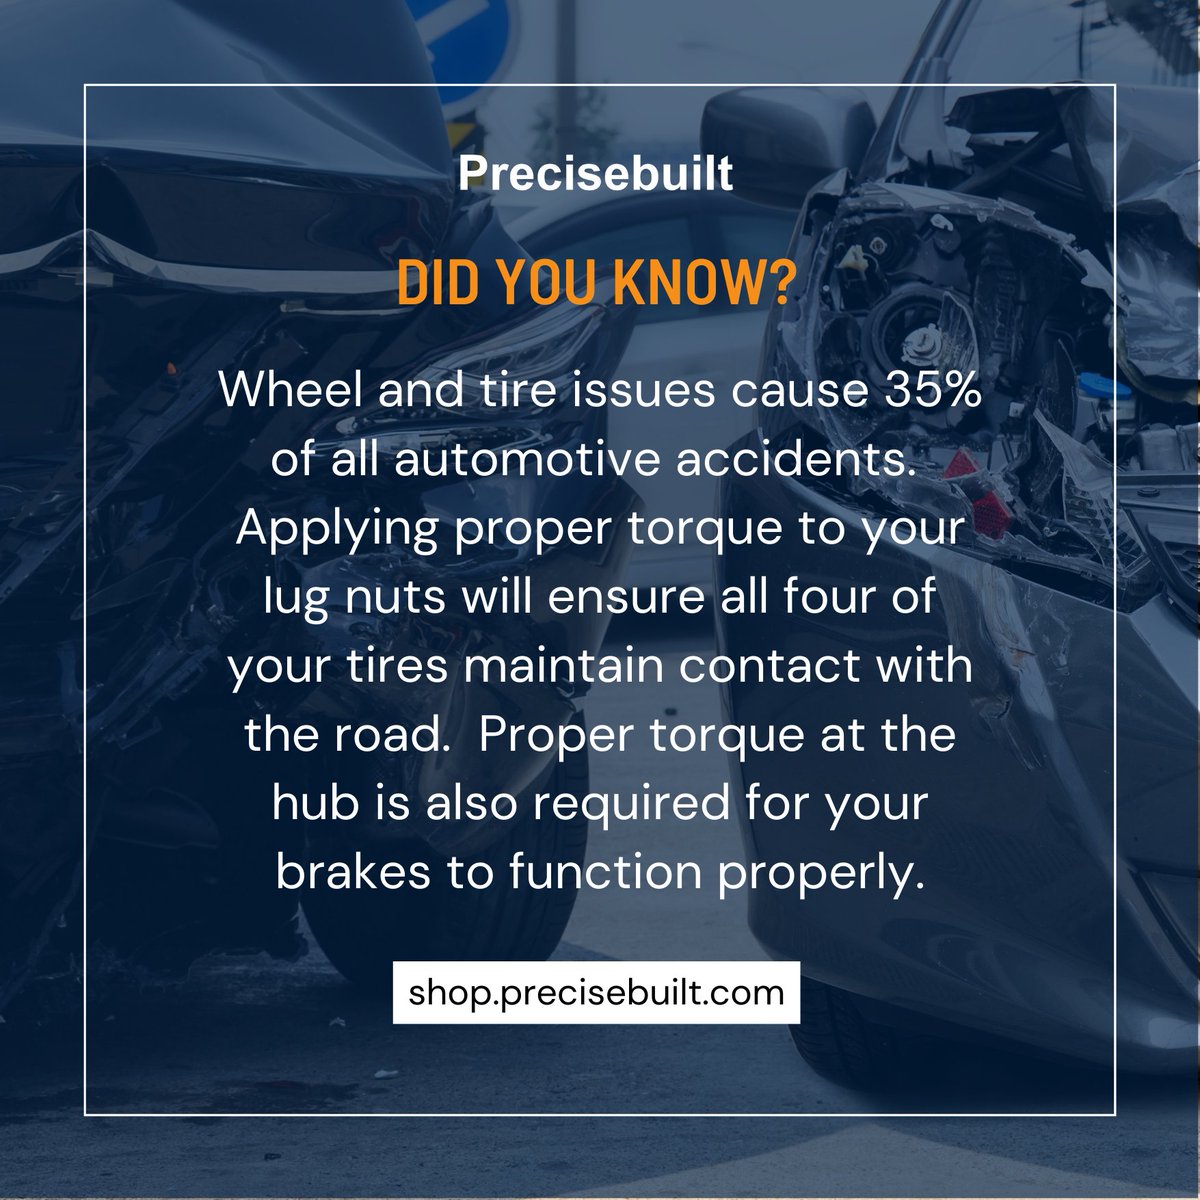 #didyouknow #facts #wheels #tires #auto #accident #lugnuts #brakes #proper #torque #precisebuilt #torquewrench #safety #SafetyFirst